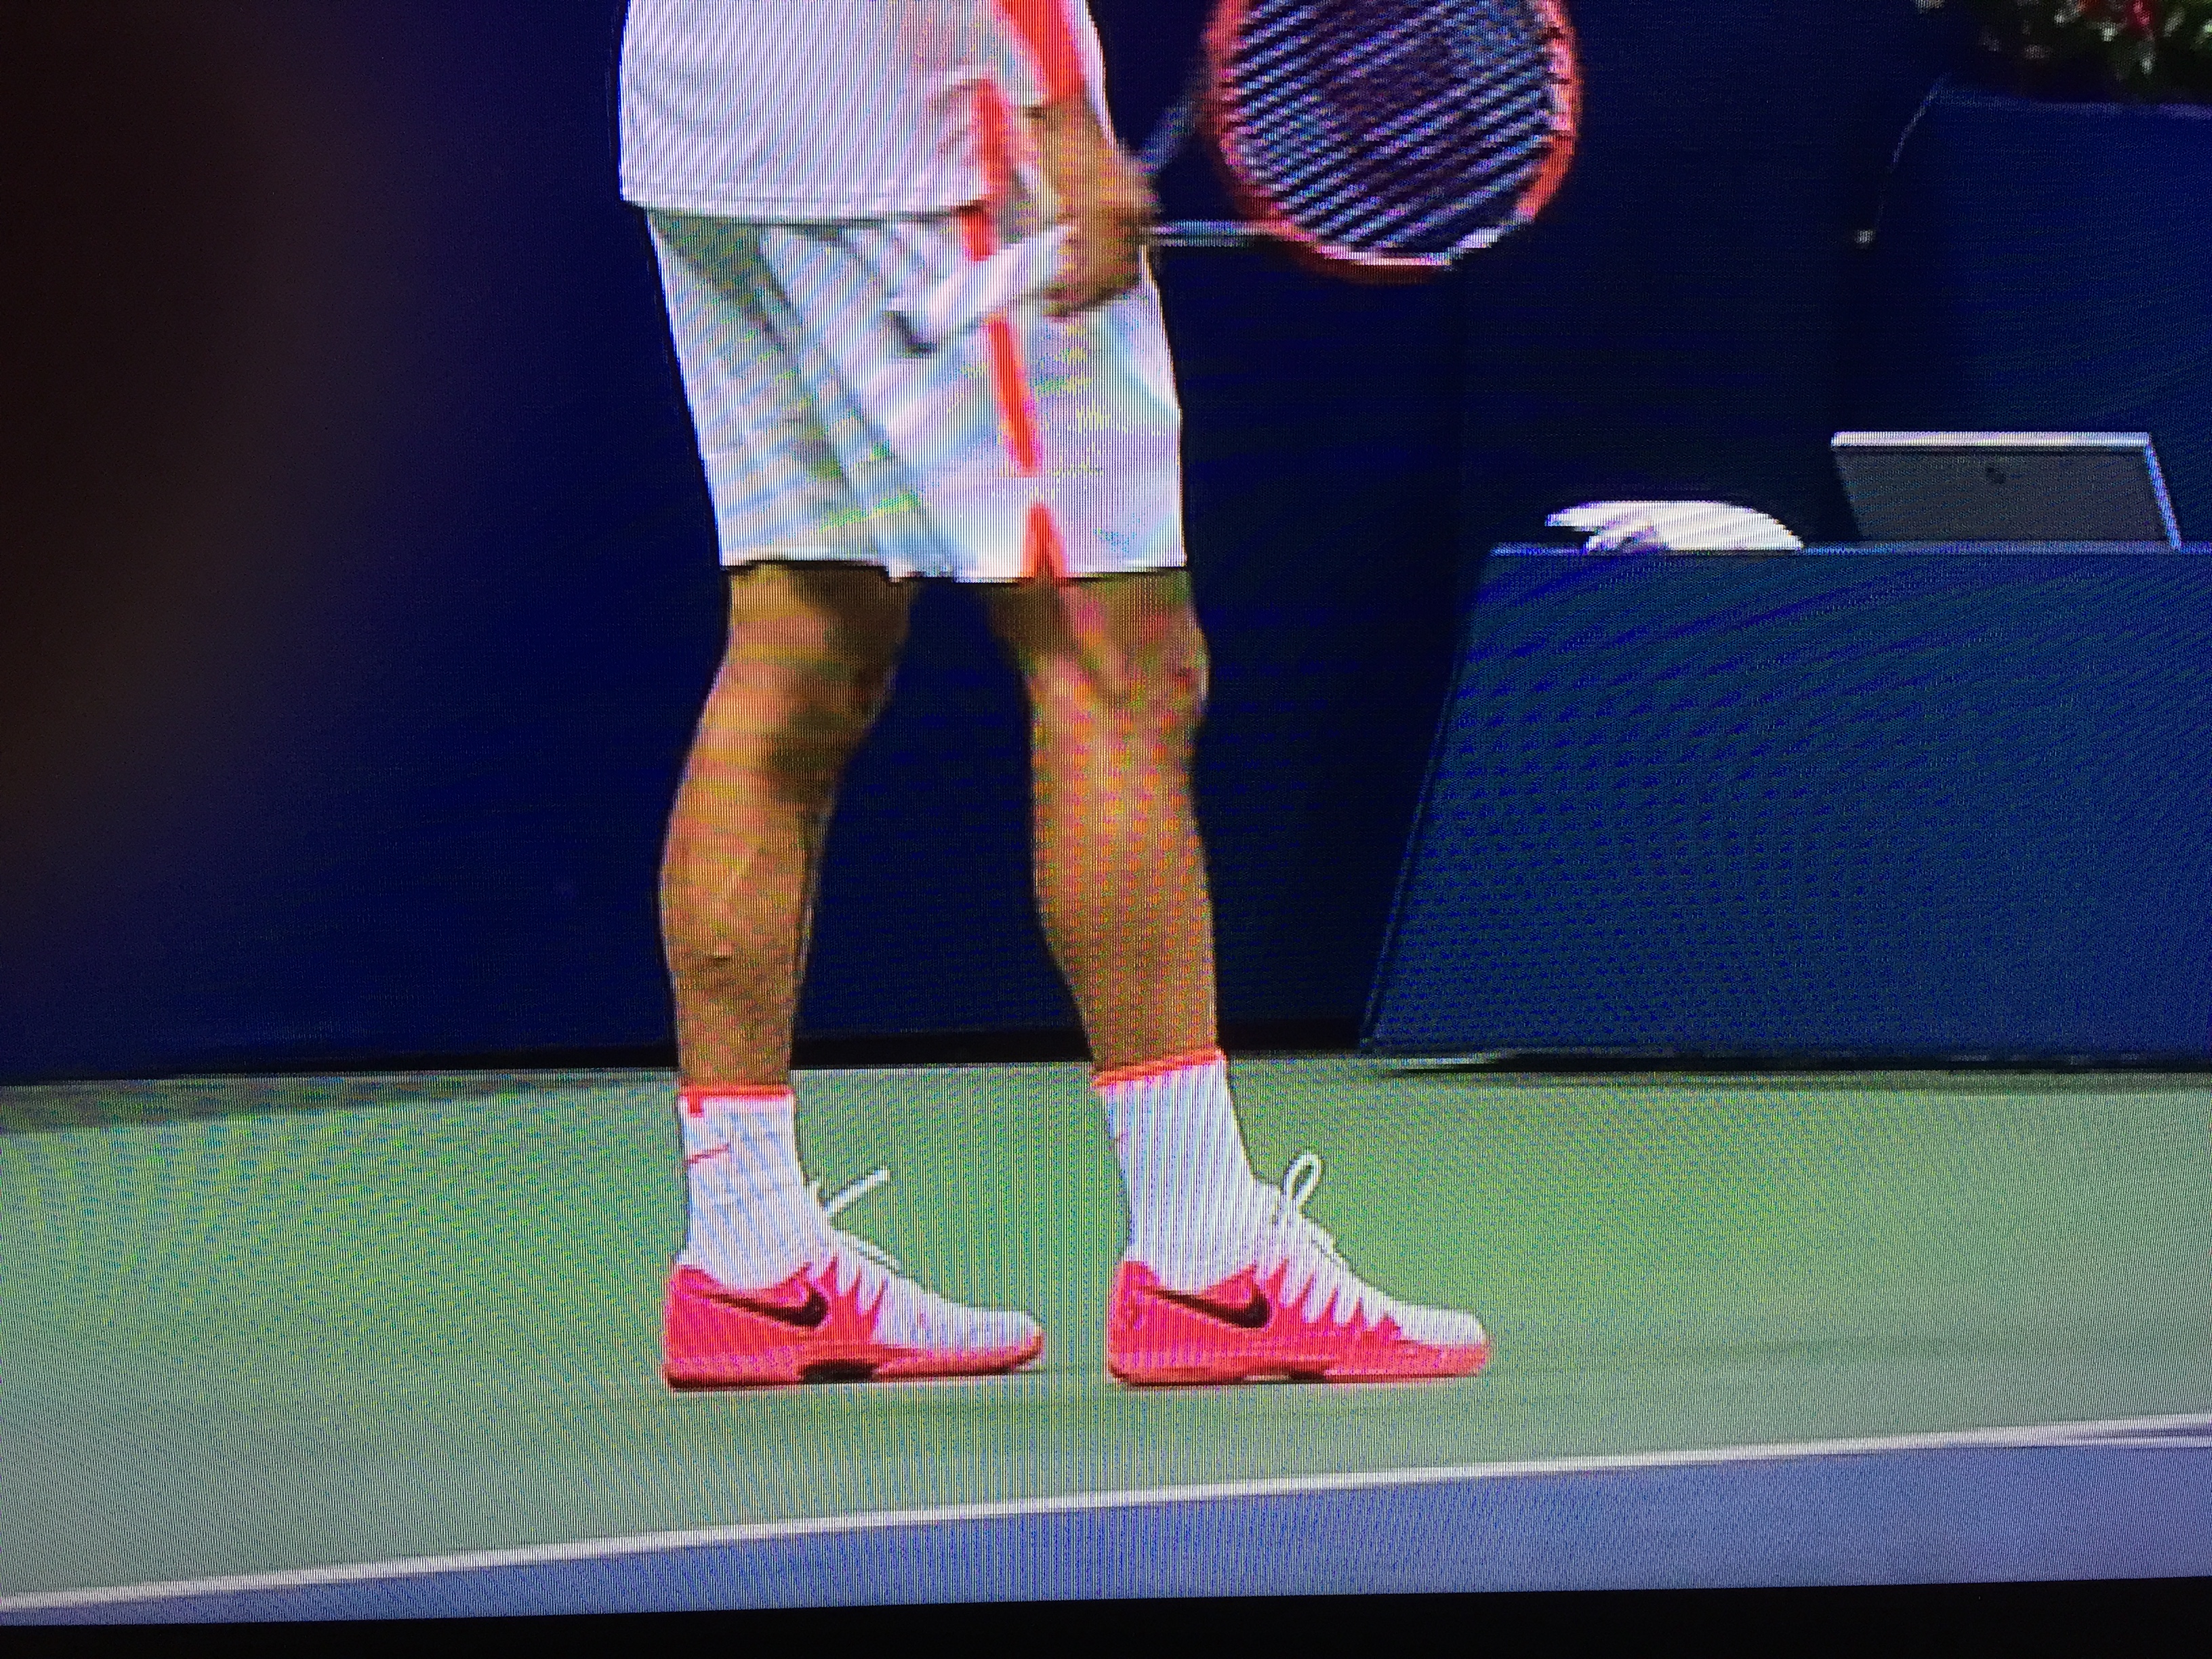 paracaídas rociar tiempo Roger Federer's pink Nike shoes were pretty, pretty ugly | For The Win